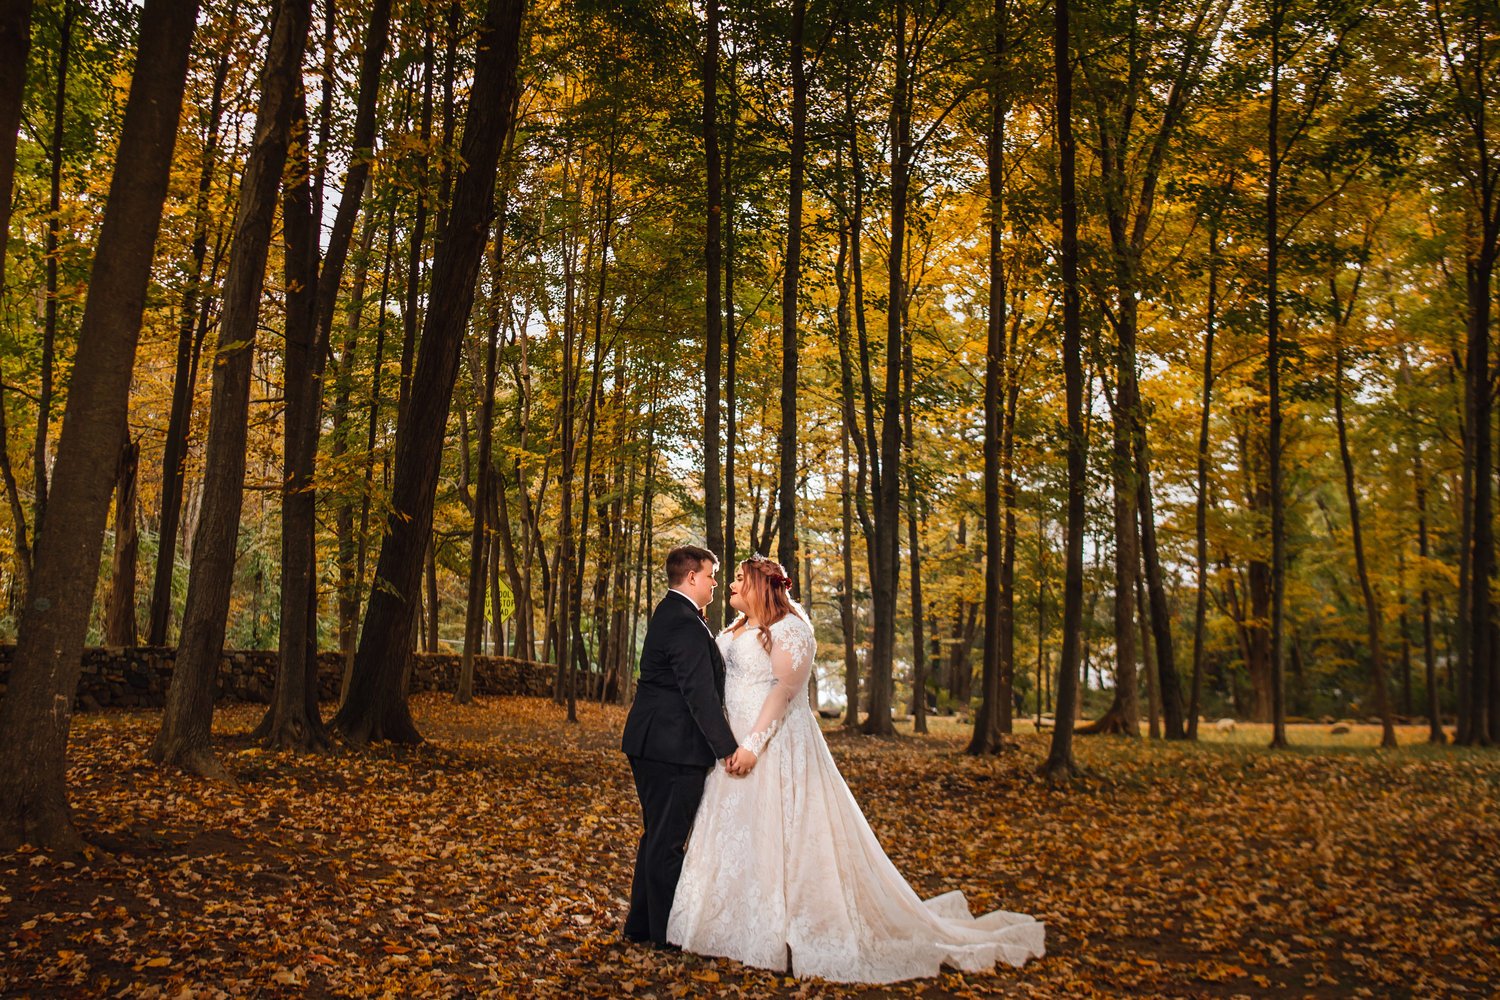 Suzanne &amp; Gus | October 6, 2018